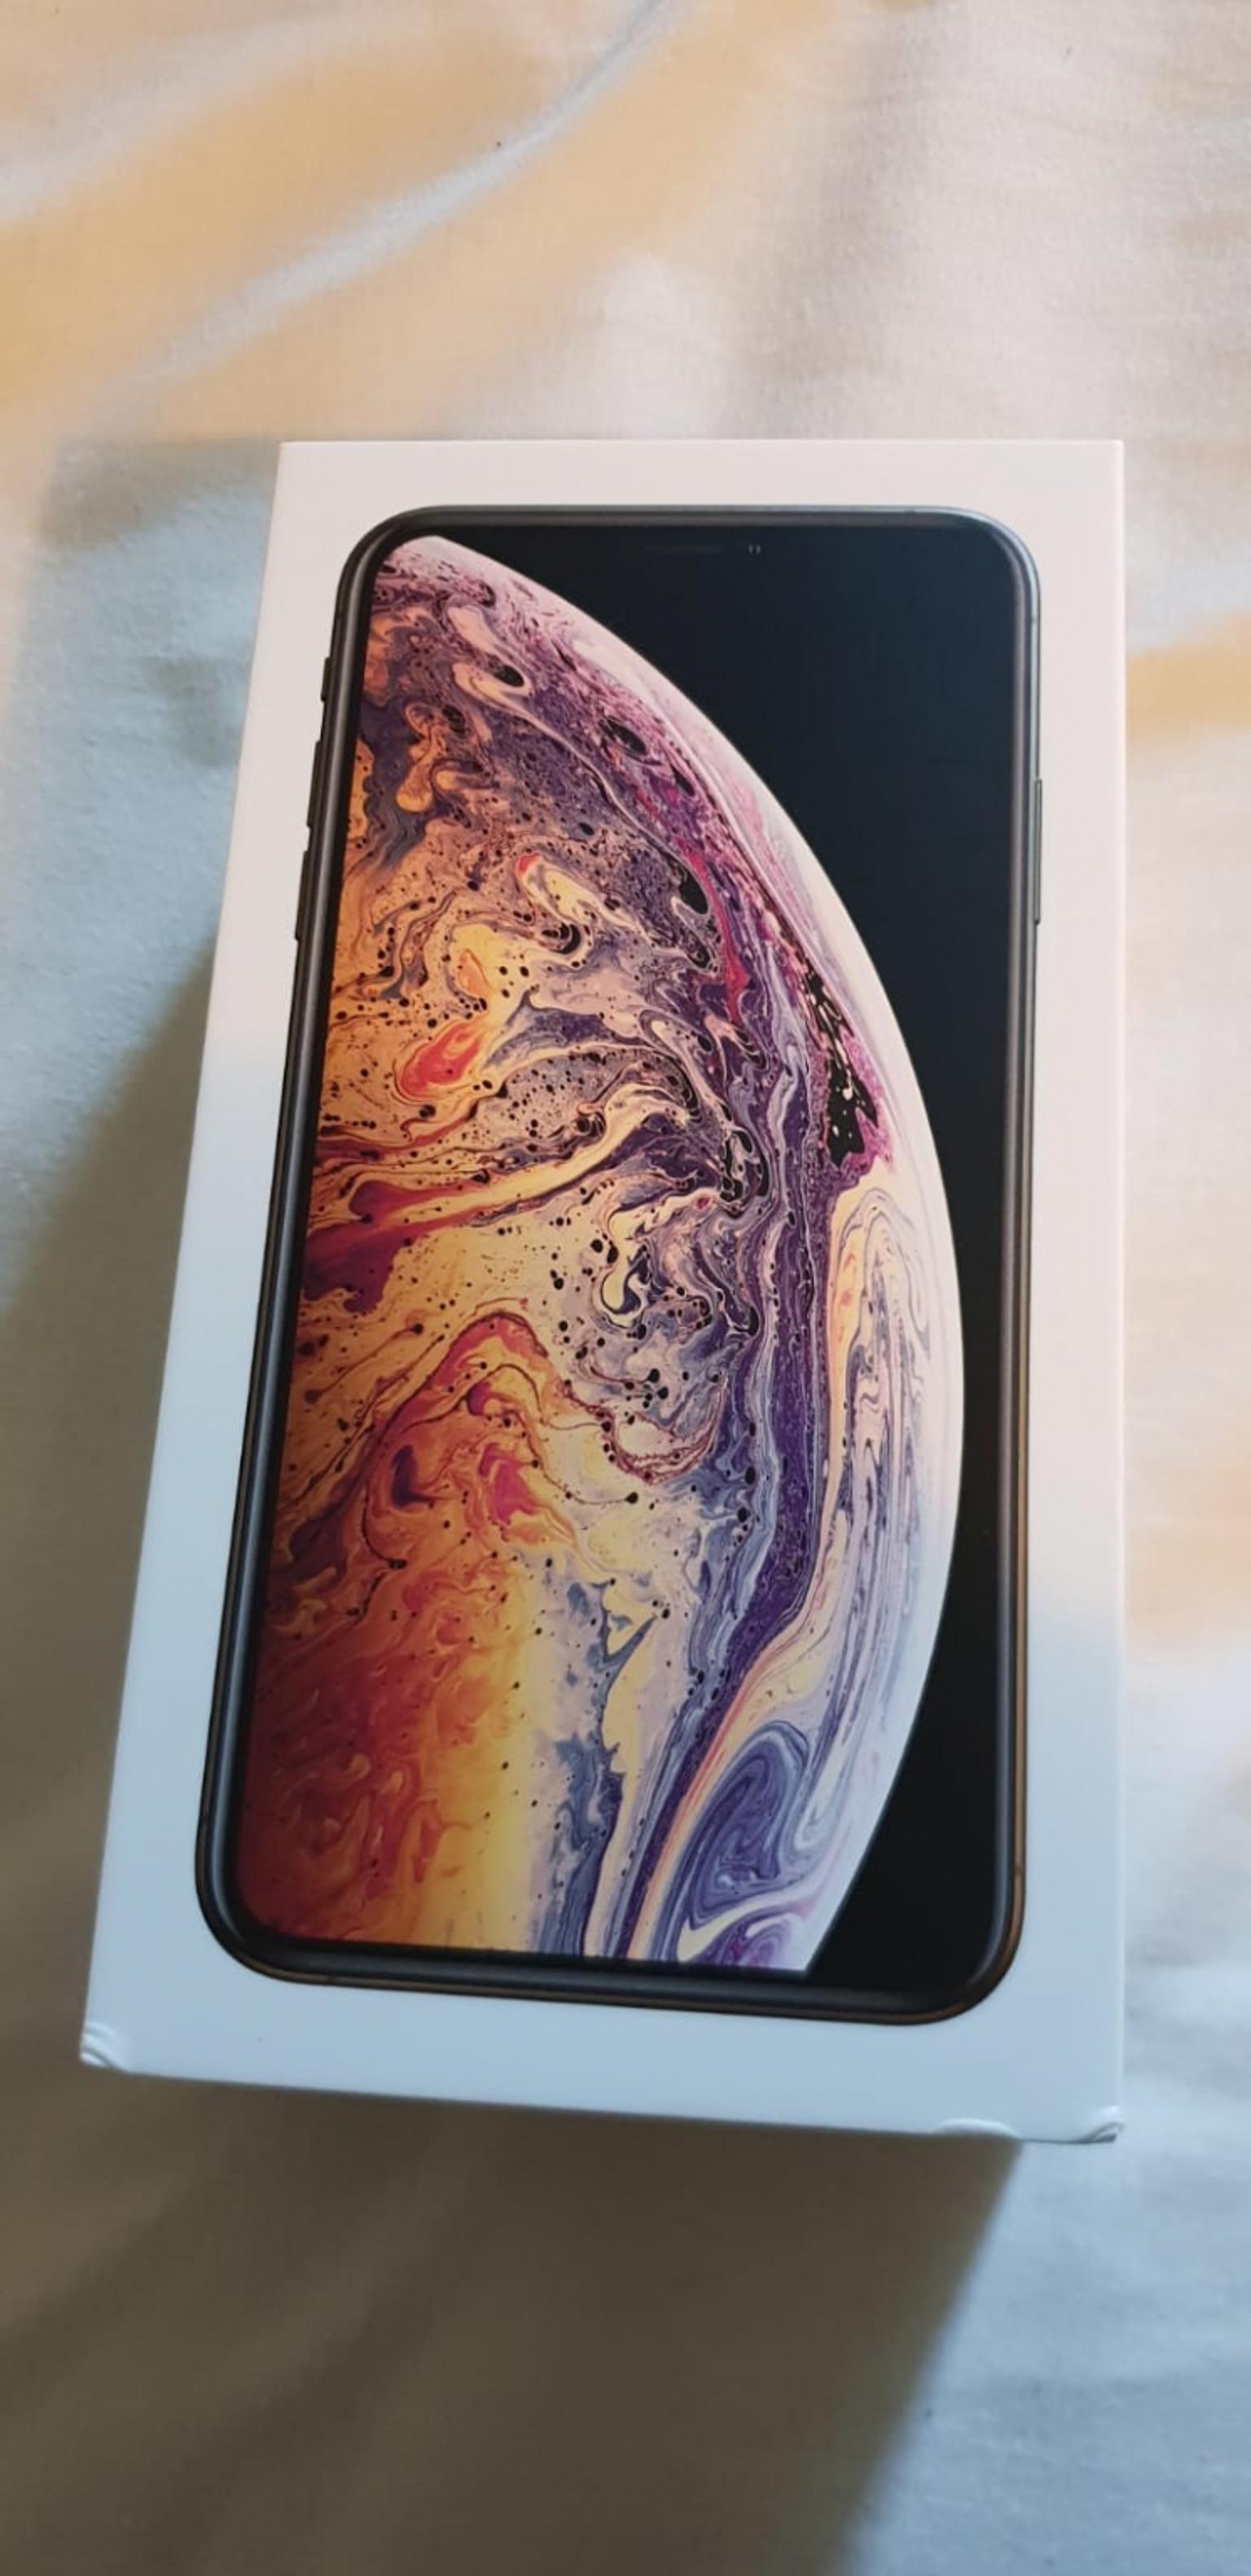 iPhone Xs Max 64gb Gold (SMASHED SCREEN) in BB9 Pendle for £520.00 for sale | Shpock